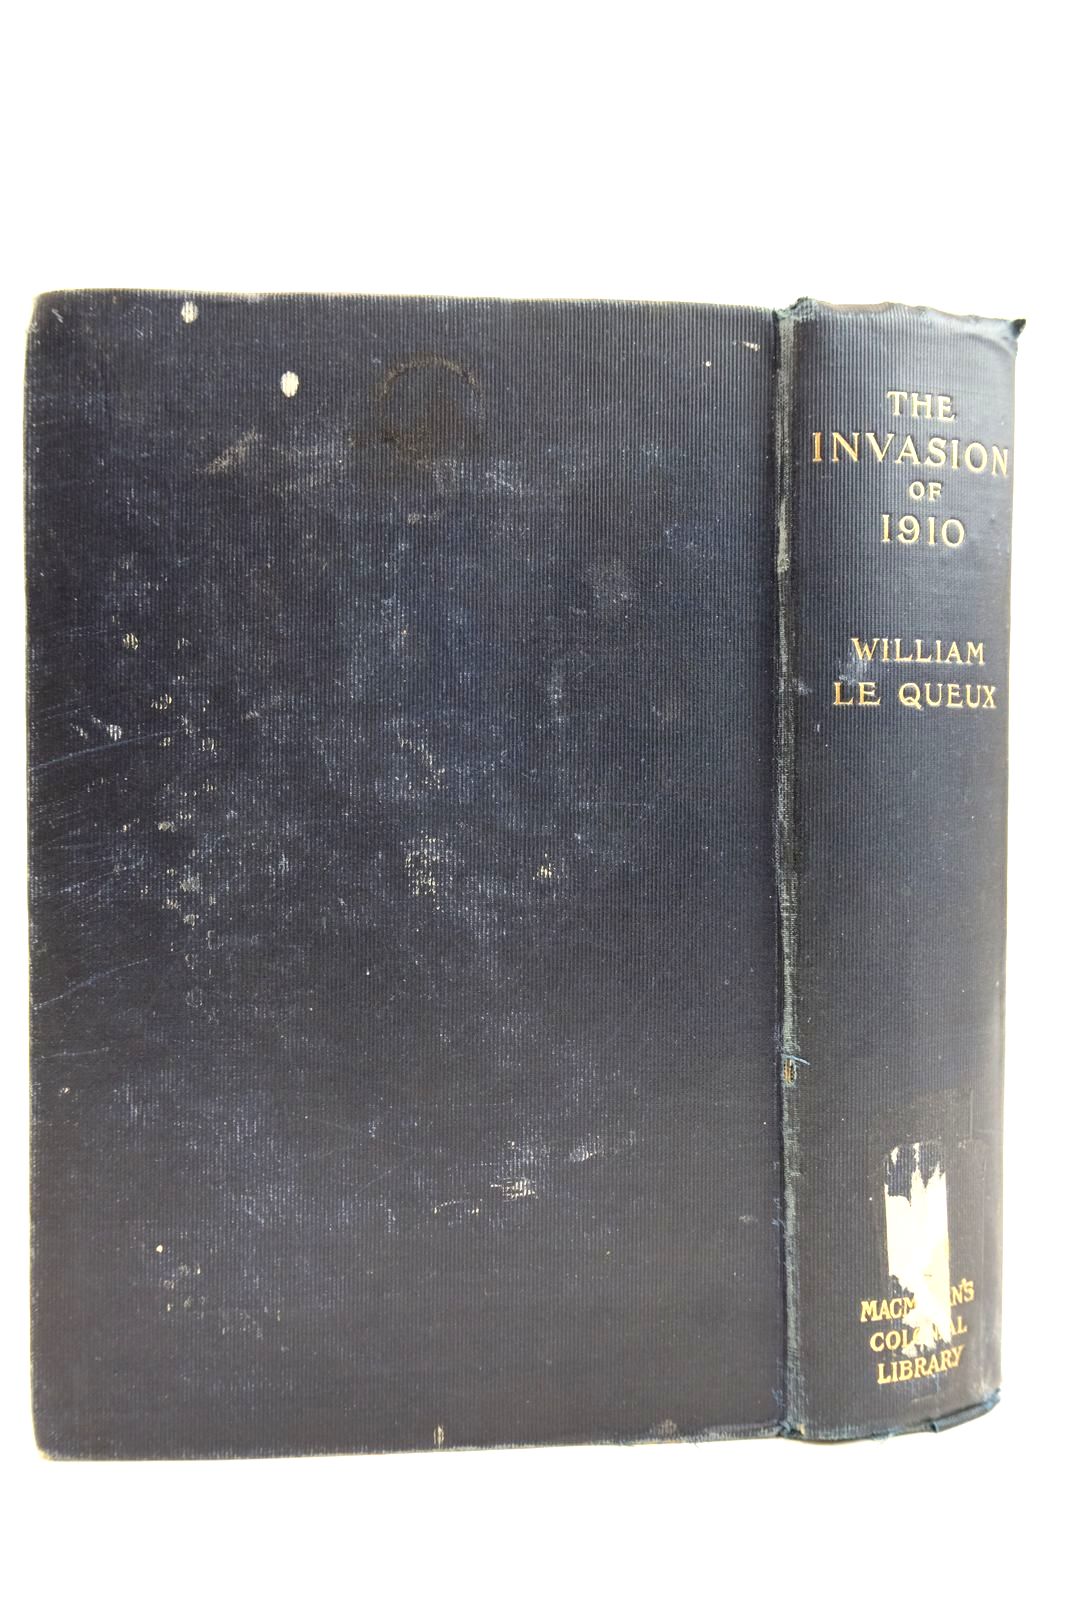 Photo of THE INVASION OF 1910 WITH A FULL ACCOUNT OF THE SIEGE OF LONDON written by Le Queux, William published by Macmillan & Co. Ltd. (STOCK CODE: 2134006)  for sale by Stella & Rose's Books